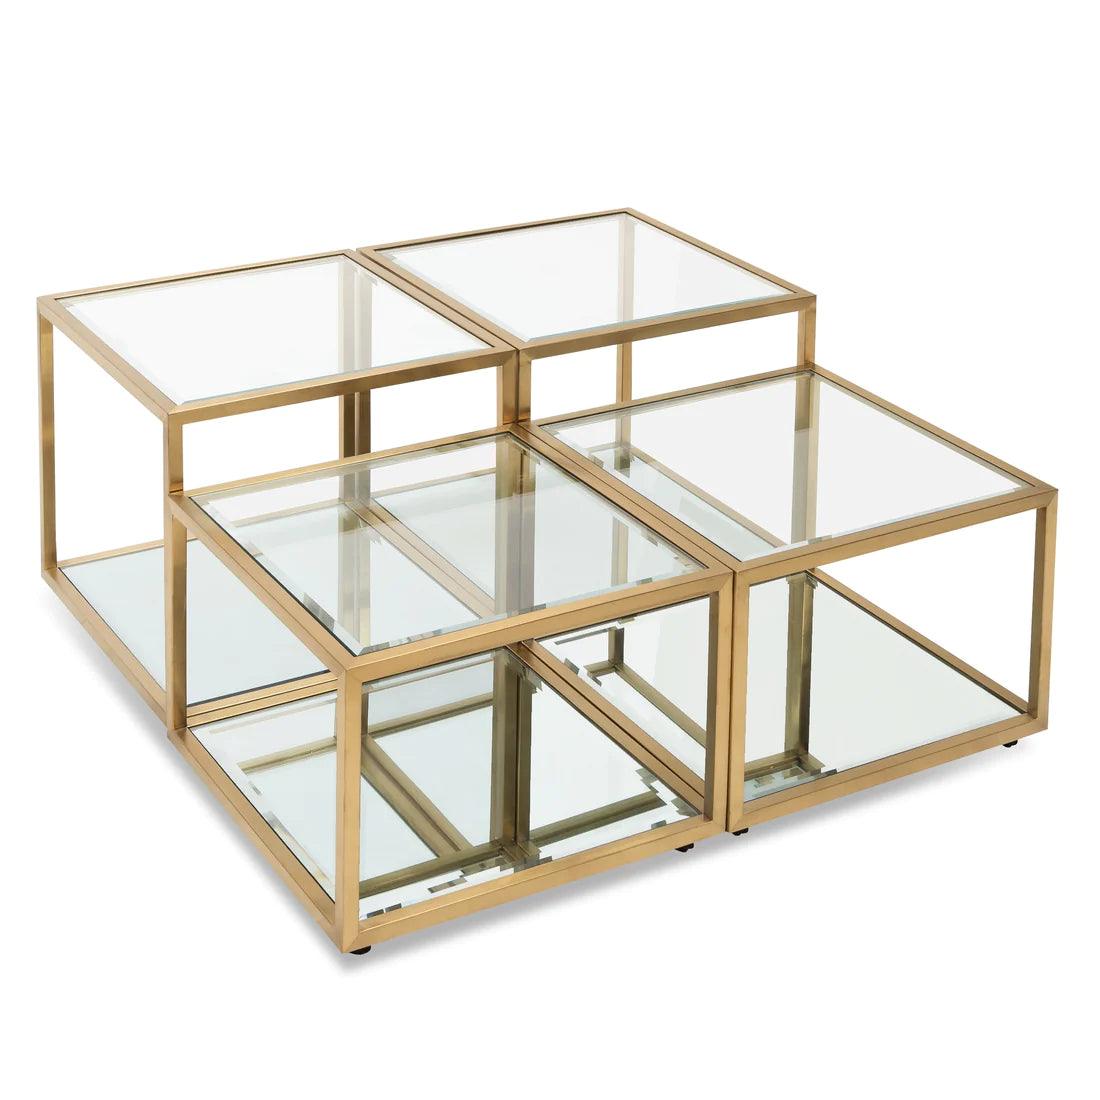 Melo 100cm Glass Coffee Table - Brushed Gold Base (Set of 4) - Furniture Castle